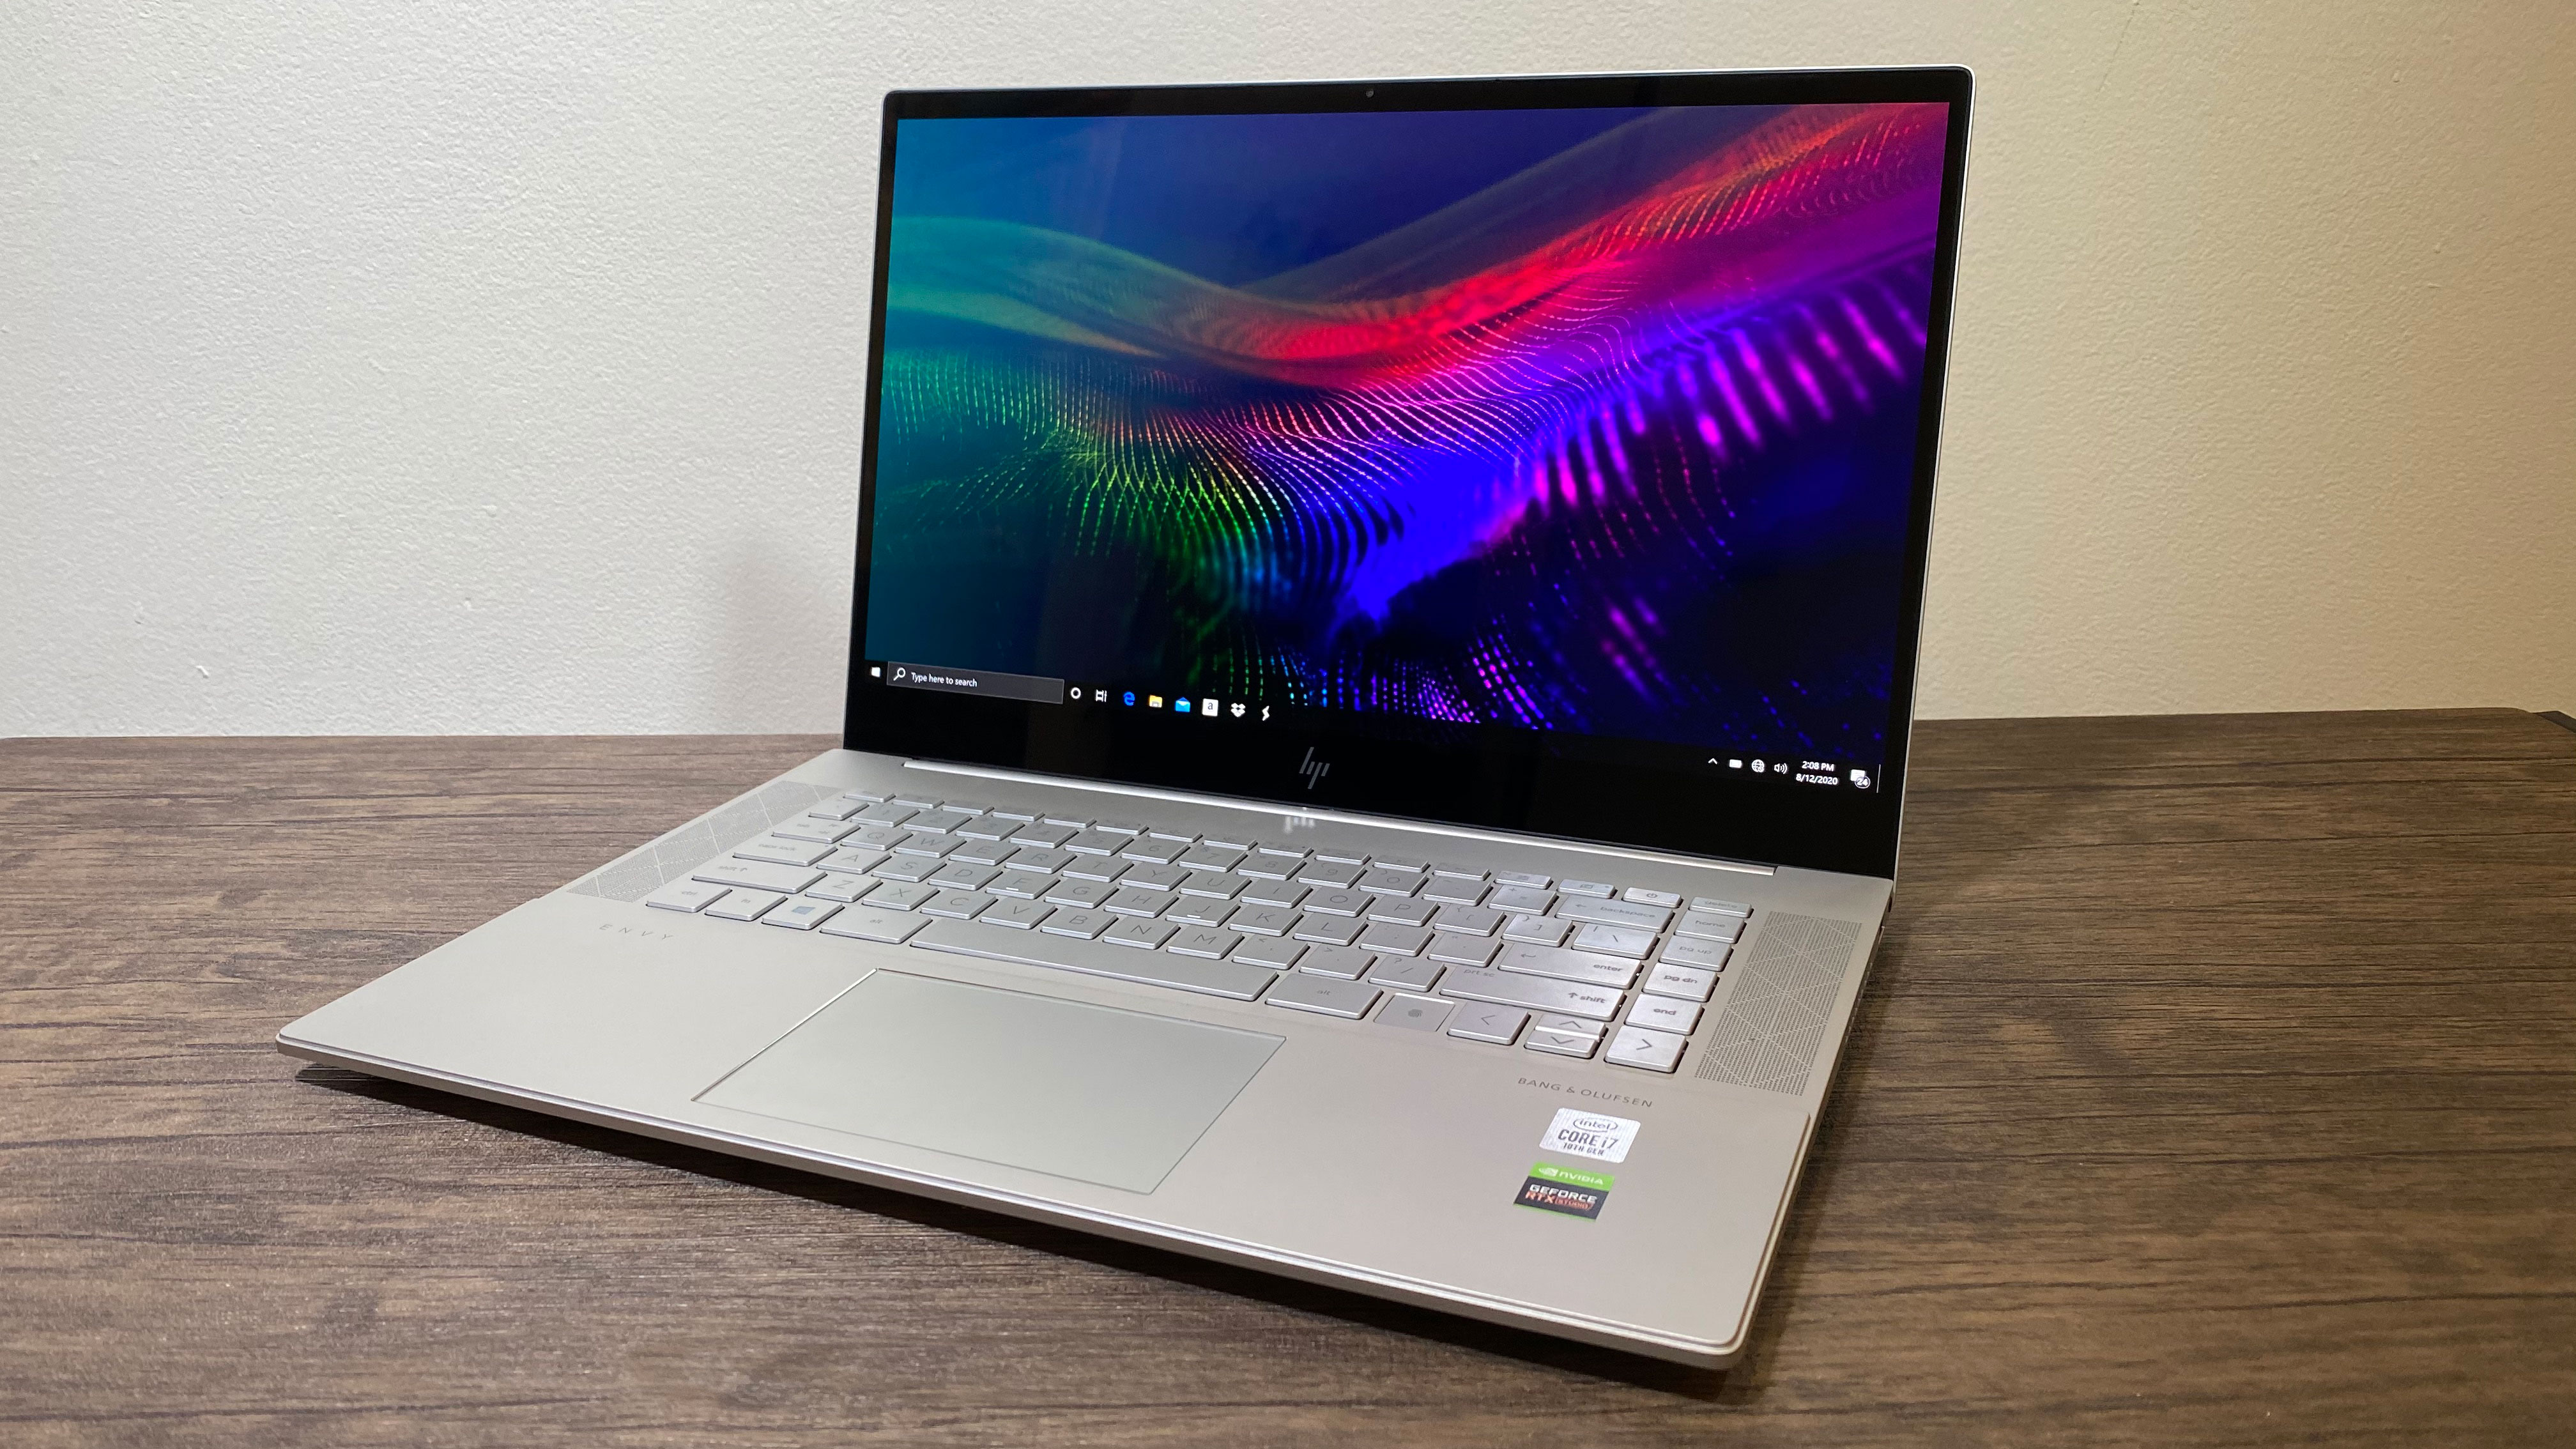 HP Envy 15 Review: Sitting at the Grown-Ups' Table